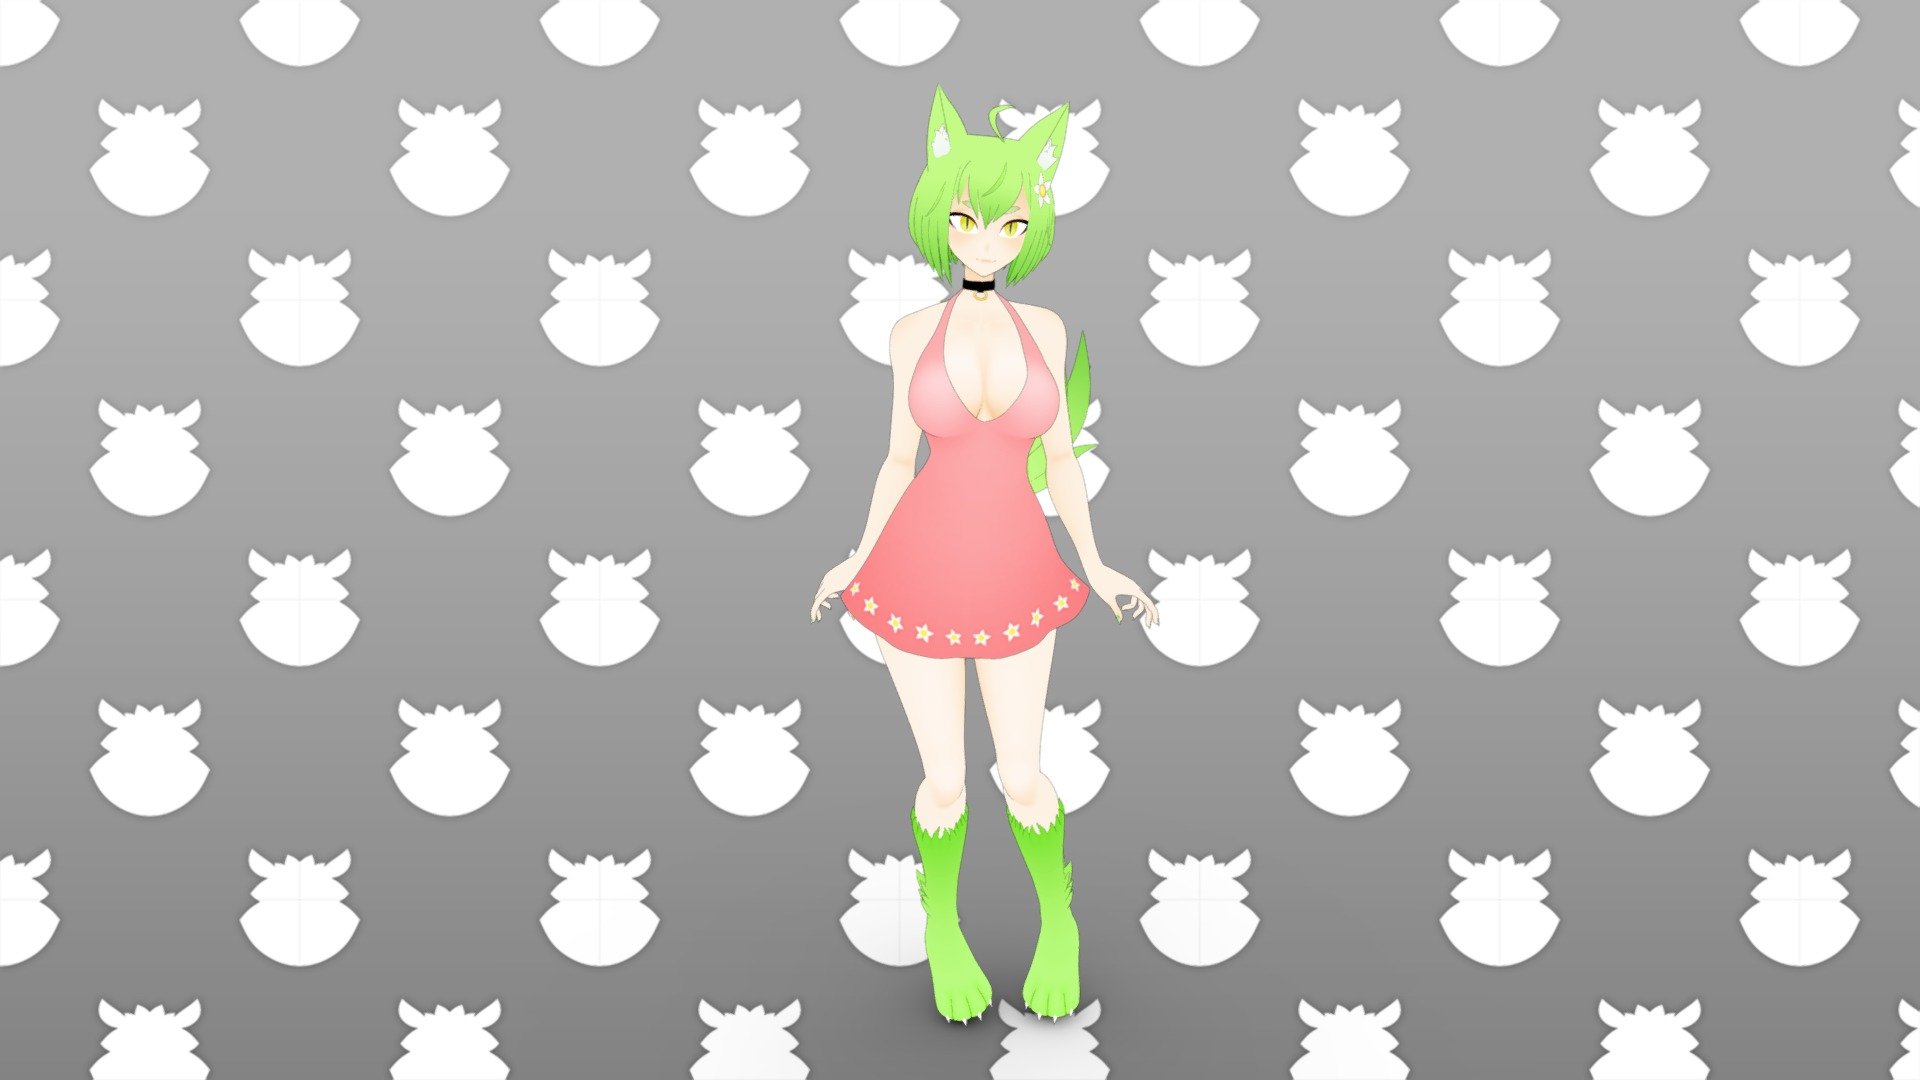 Model I was commissioned to make for use in VRChat.

If you like my work and would like to support it you can check out my Patreon or if you're interested in having me make a character for you then shoot me an inquiry through my website 3d model